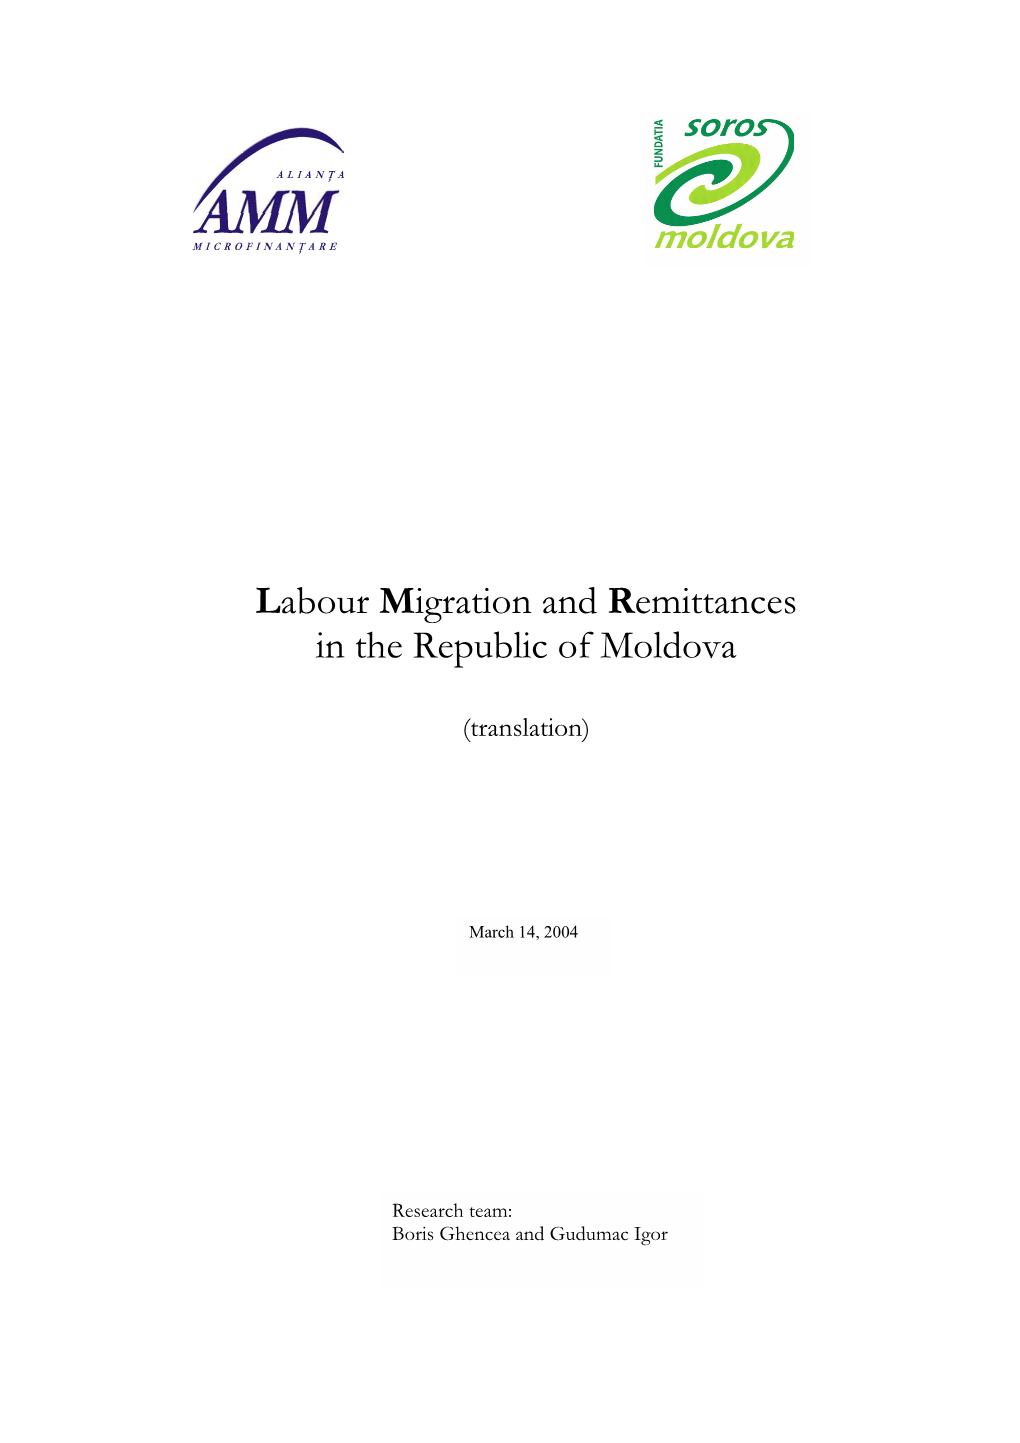 Labour Migration and Remittances in the Republic of Moldova